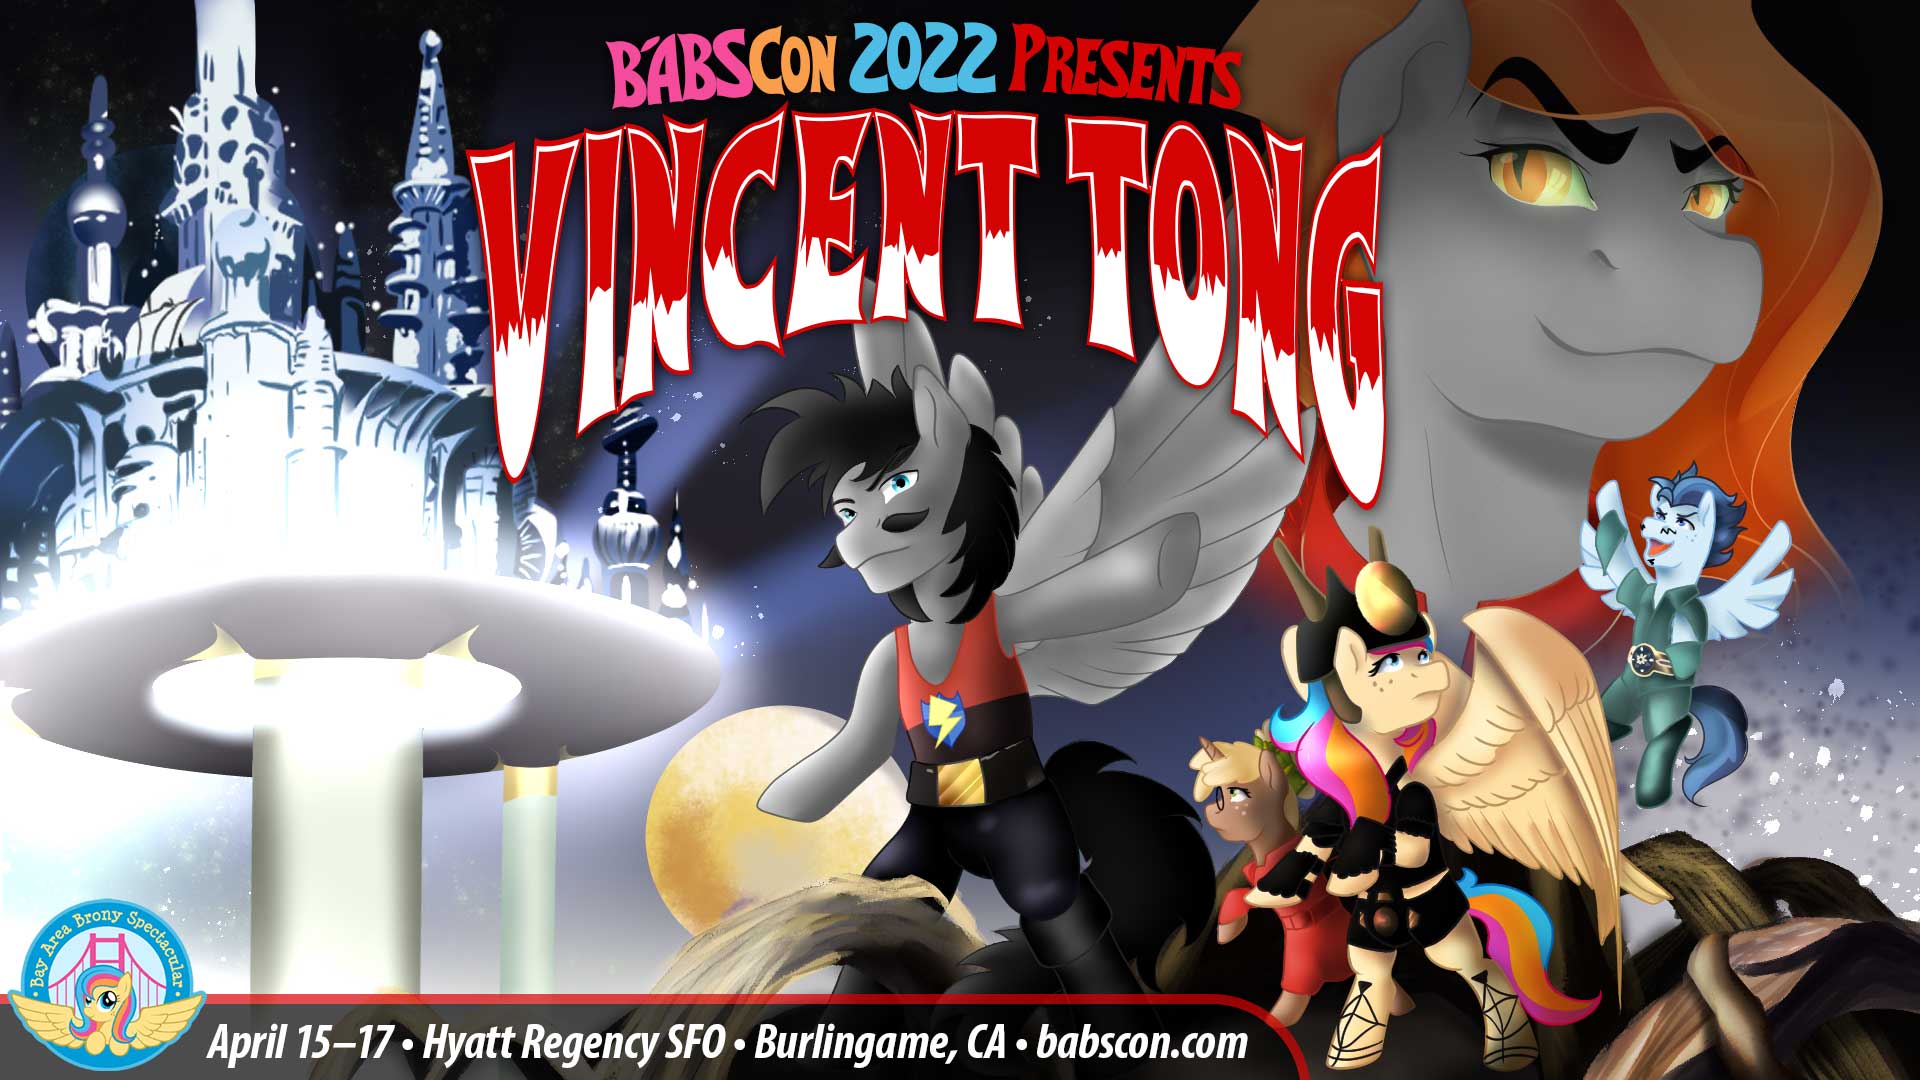 Vincent Tong Joins BABSCon 2022 in a Flash